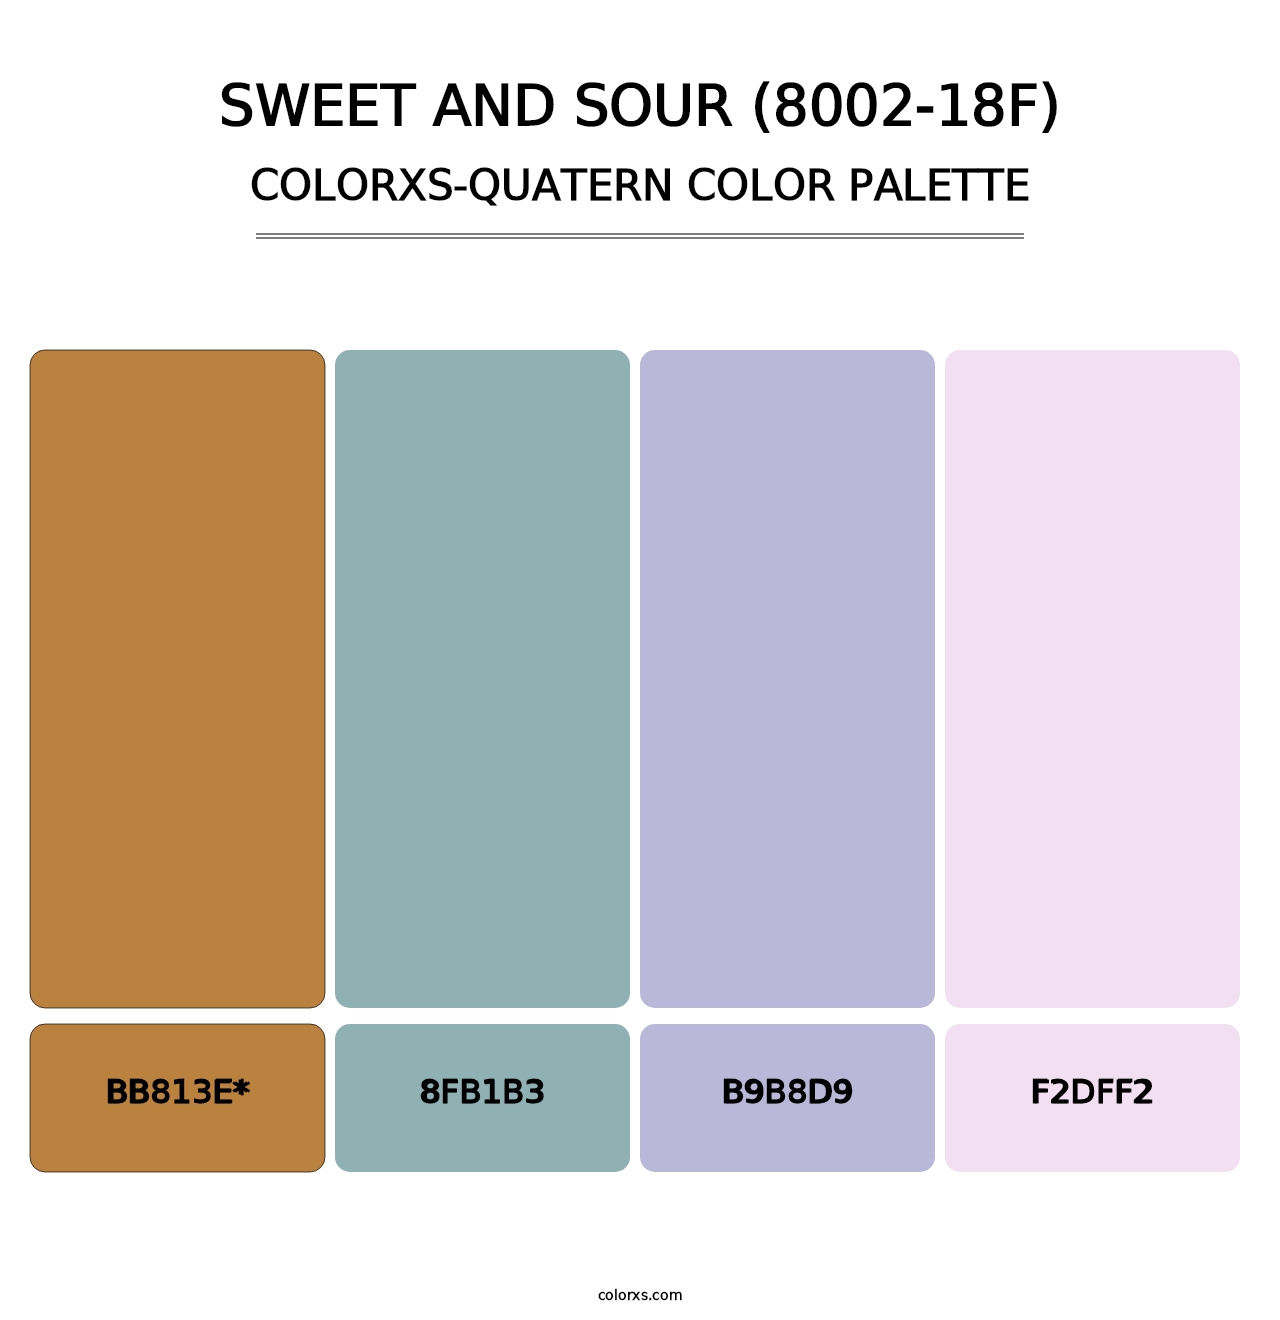 Sweet and Sour (8002-18F) - Colorxs Quatern Palette